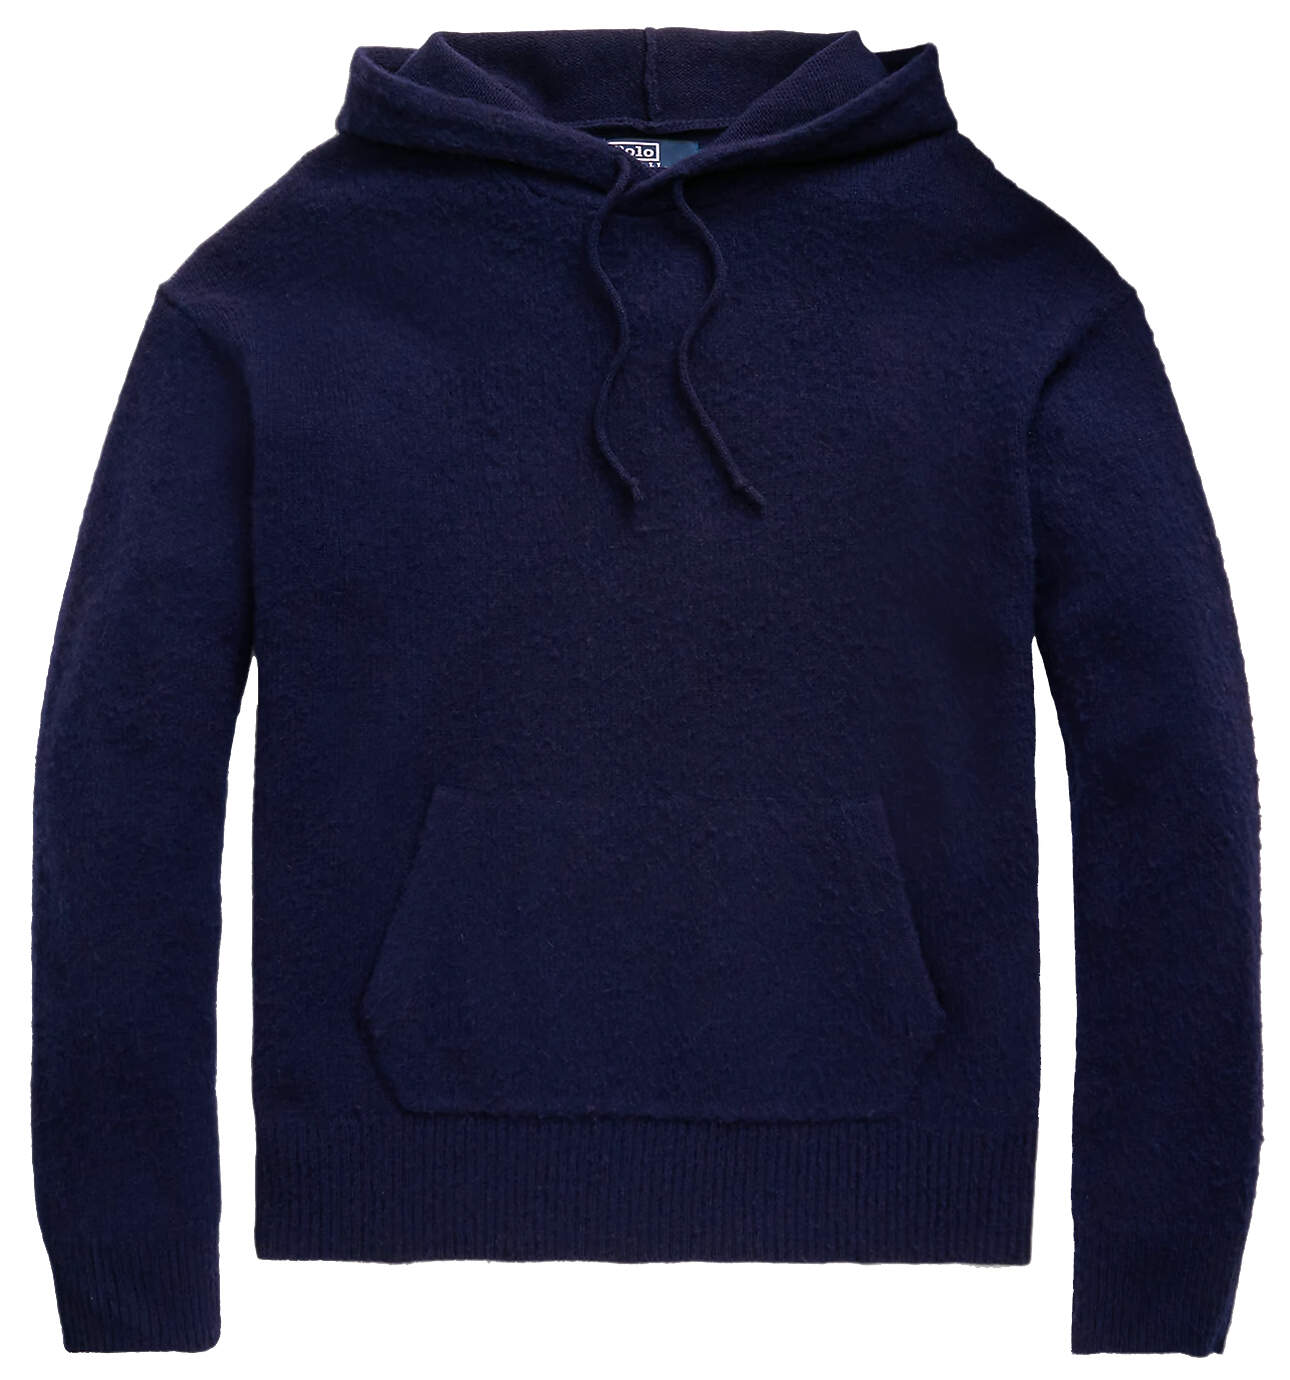 Polo Ralph Lauren Wool-Cashmere Hooded Sweater